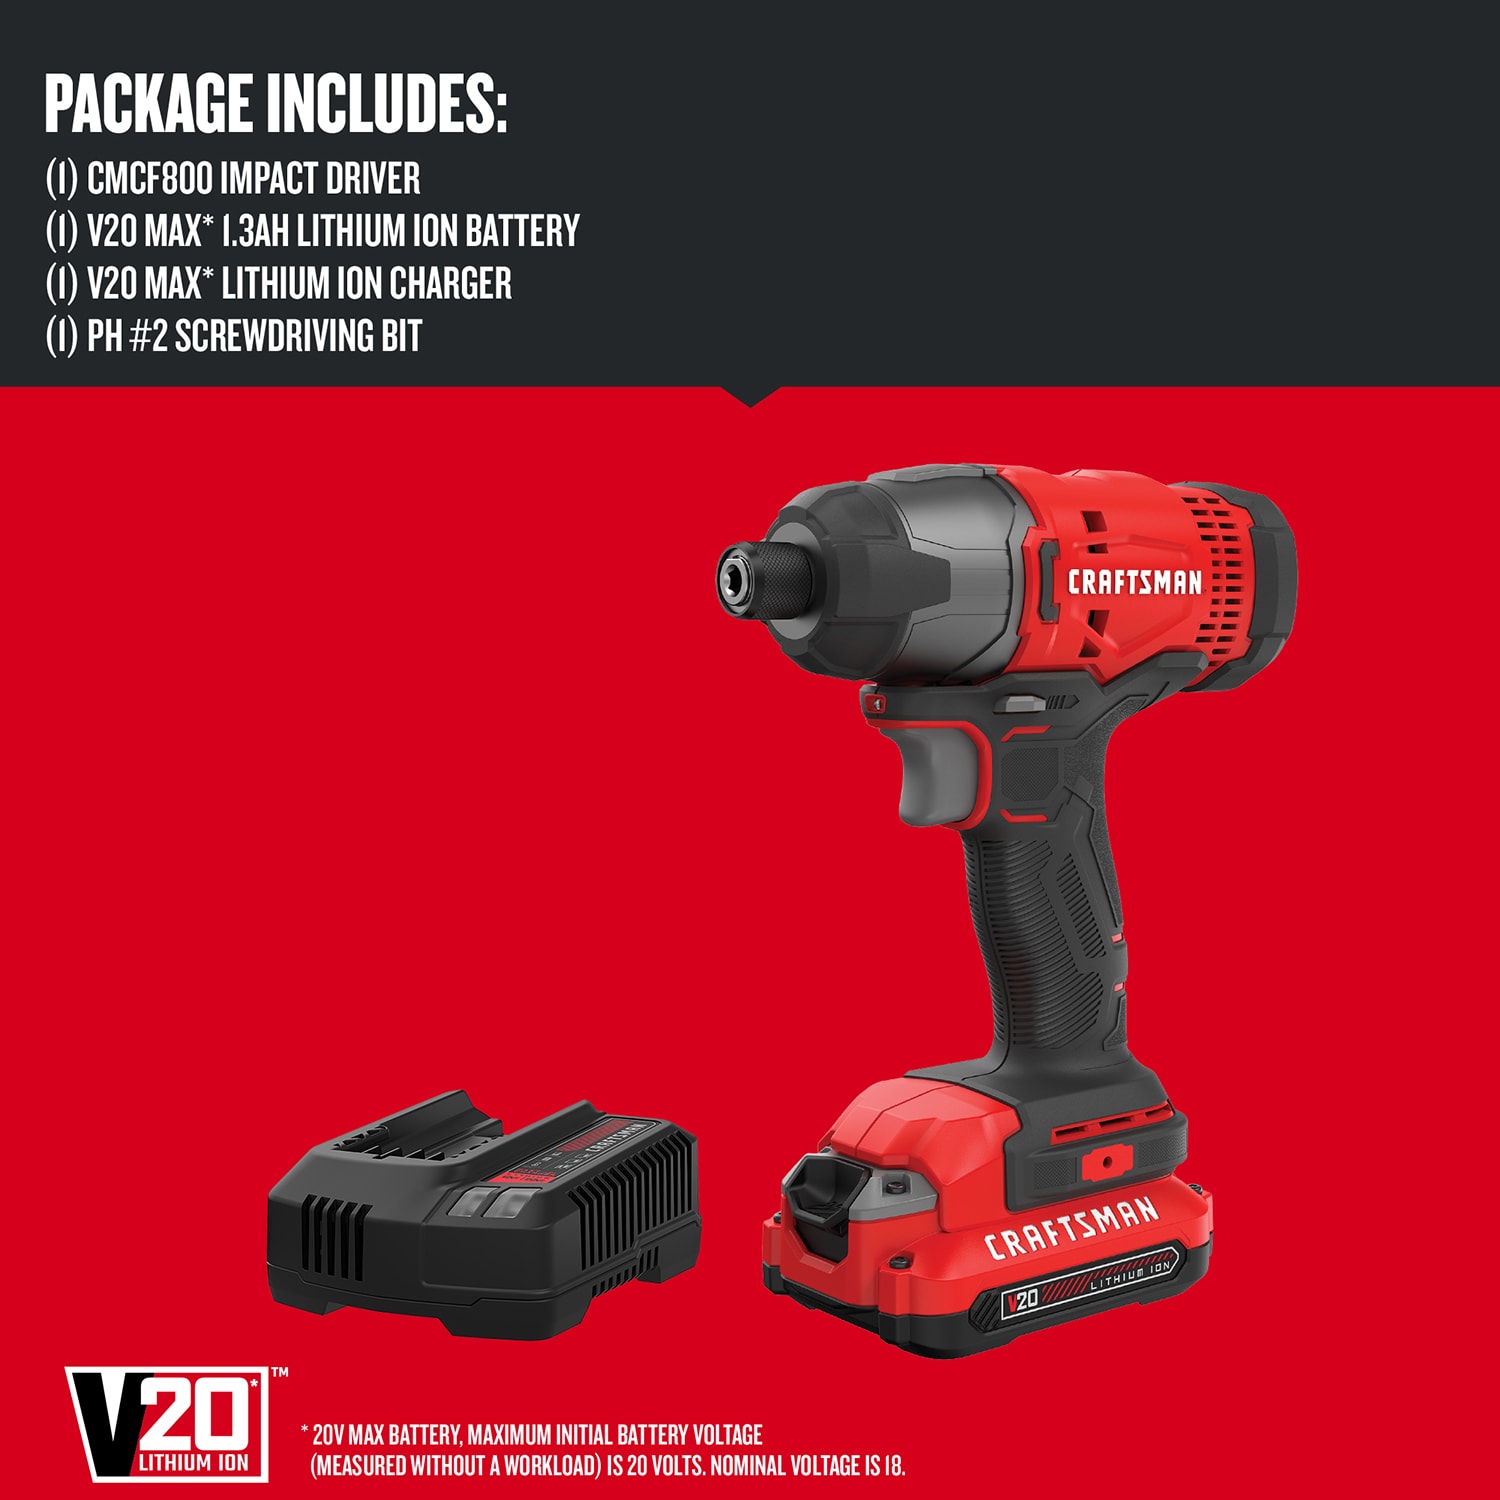 CRAFTSMAN 20-volt Max 1/4-in Cordless Impact Driver (1-Battery